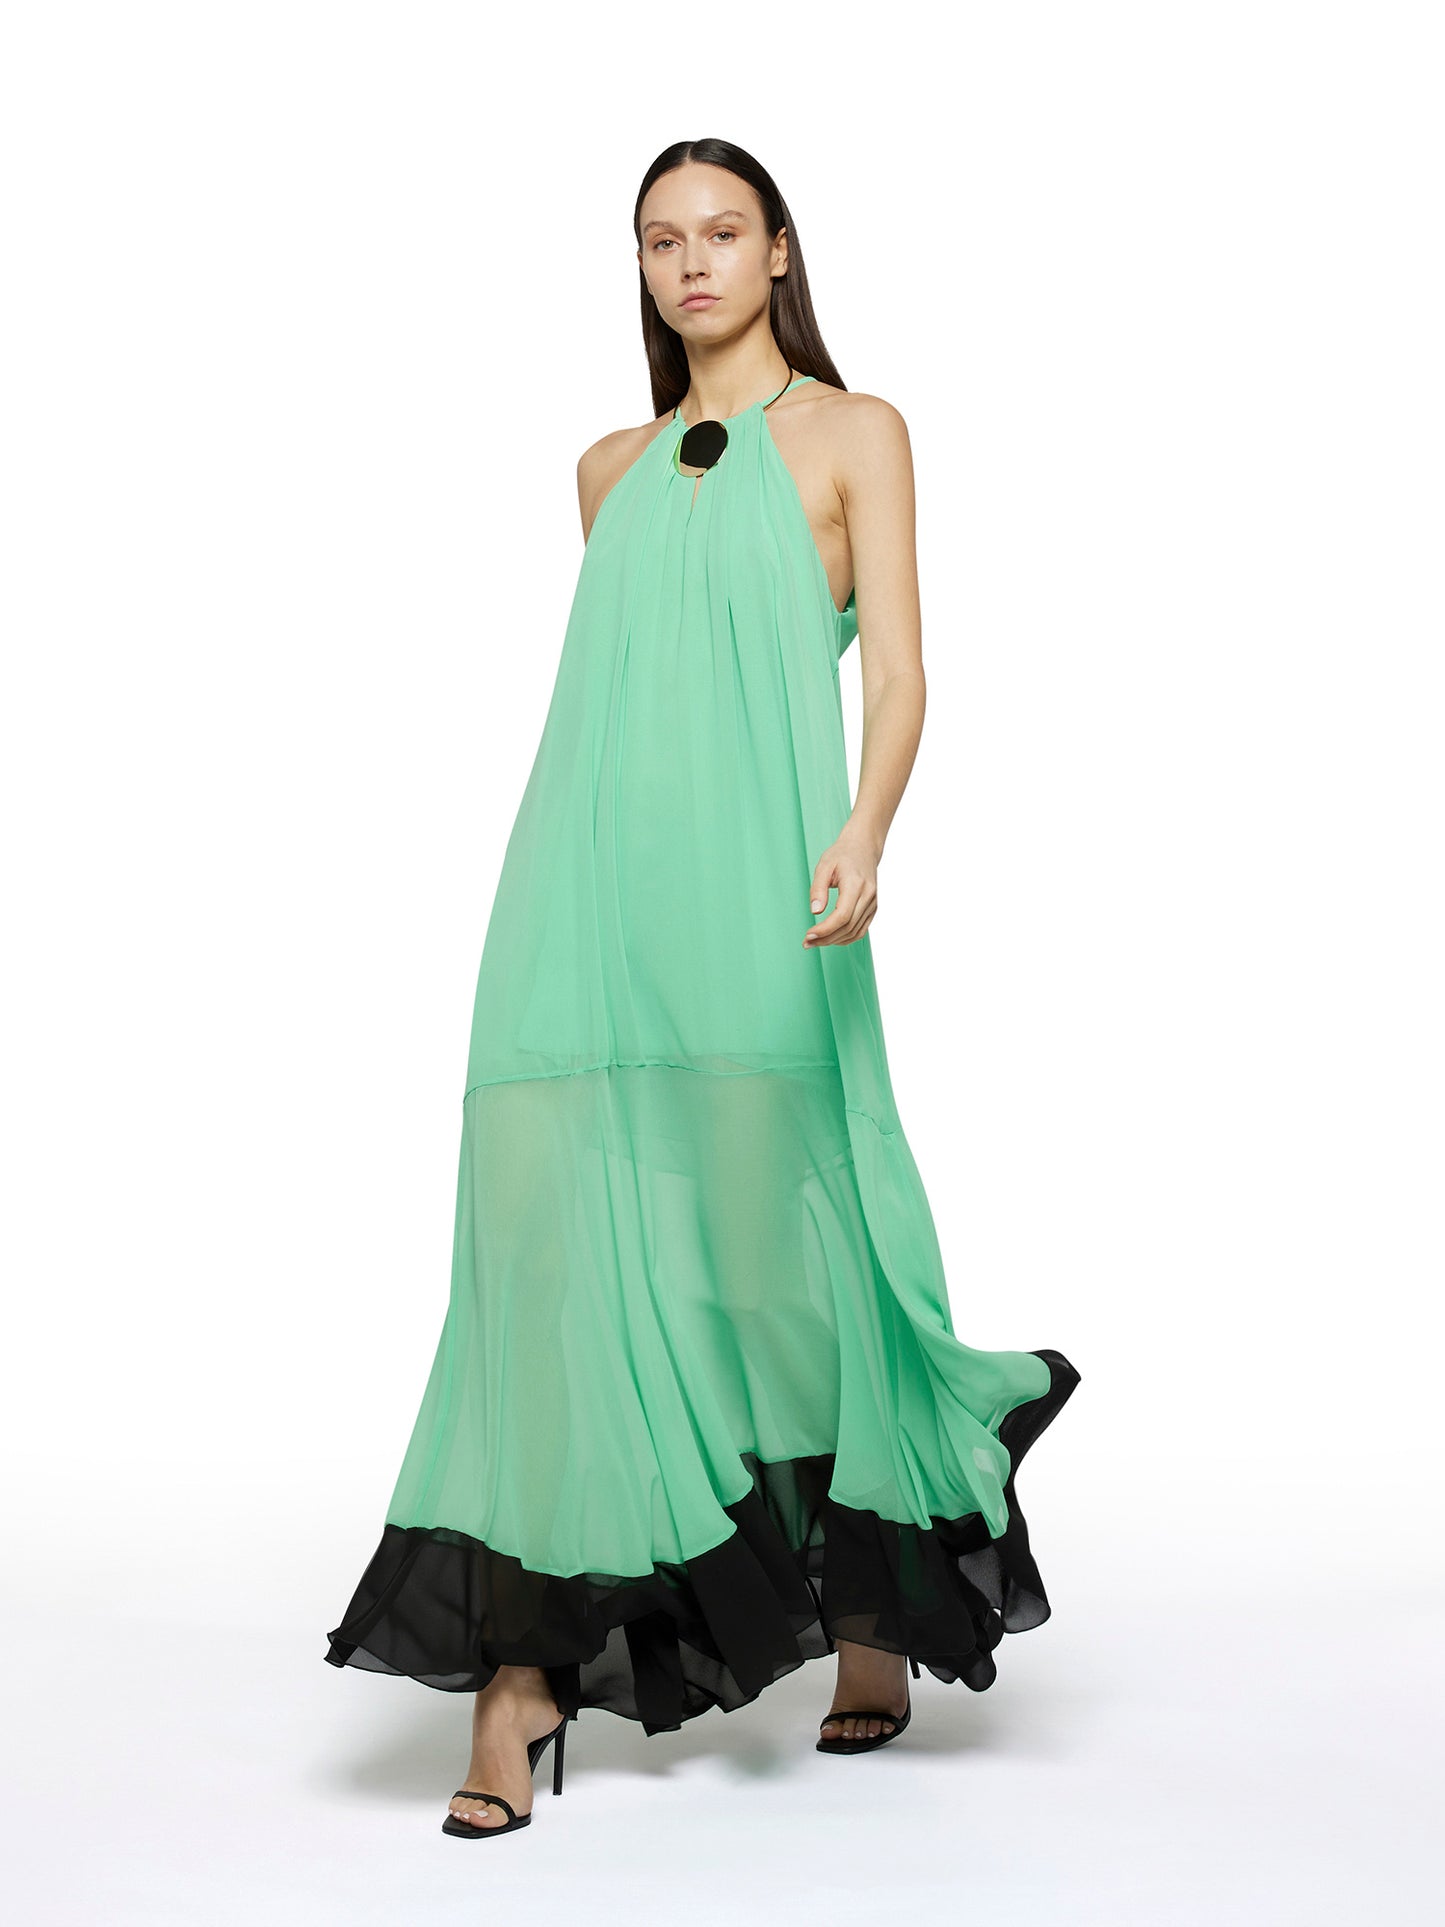 Long georgette dress with contrasting bottom ruffle